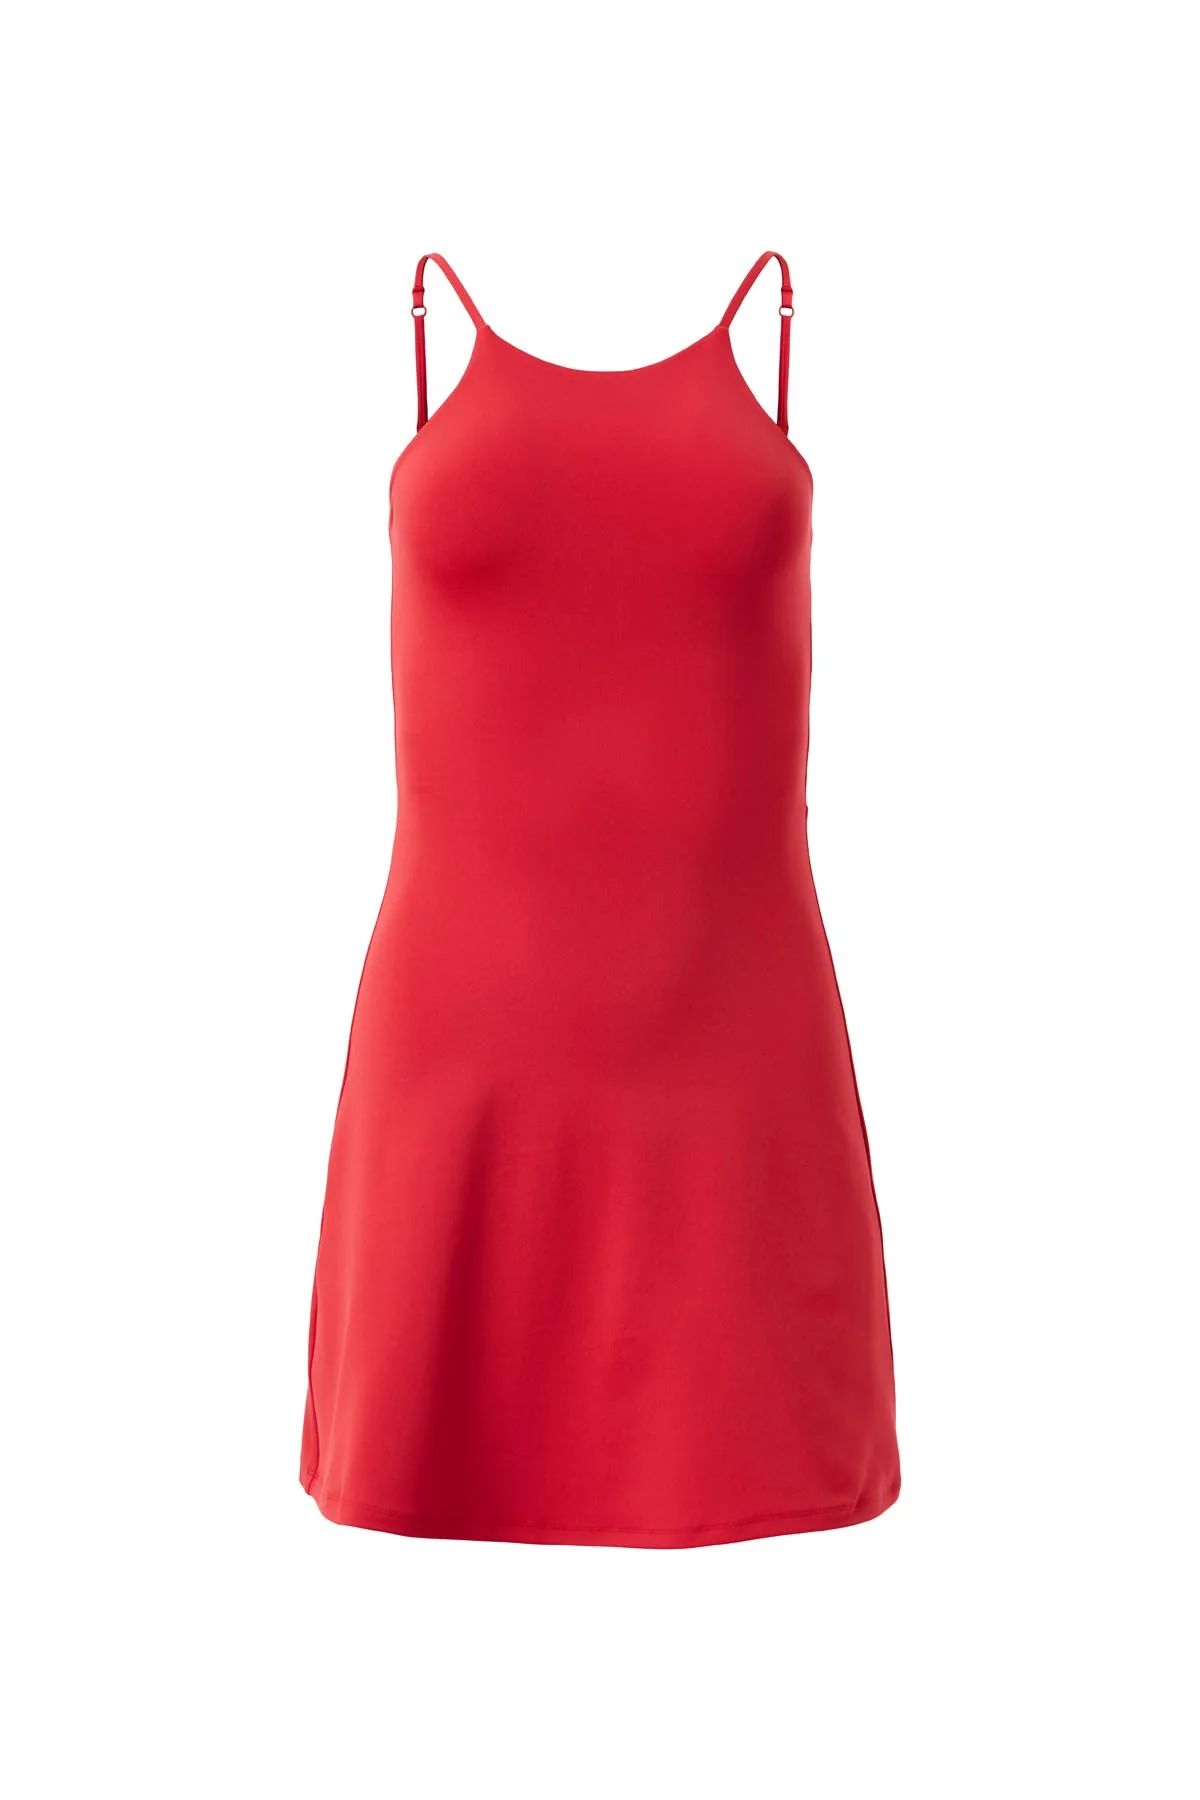 Flame Naomi Workout Dress (Compressive Liner / L) | Girlfriend Collective